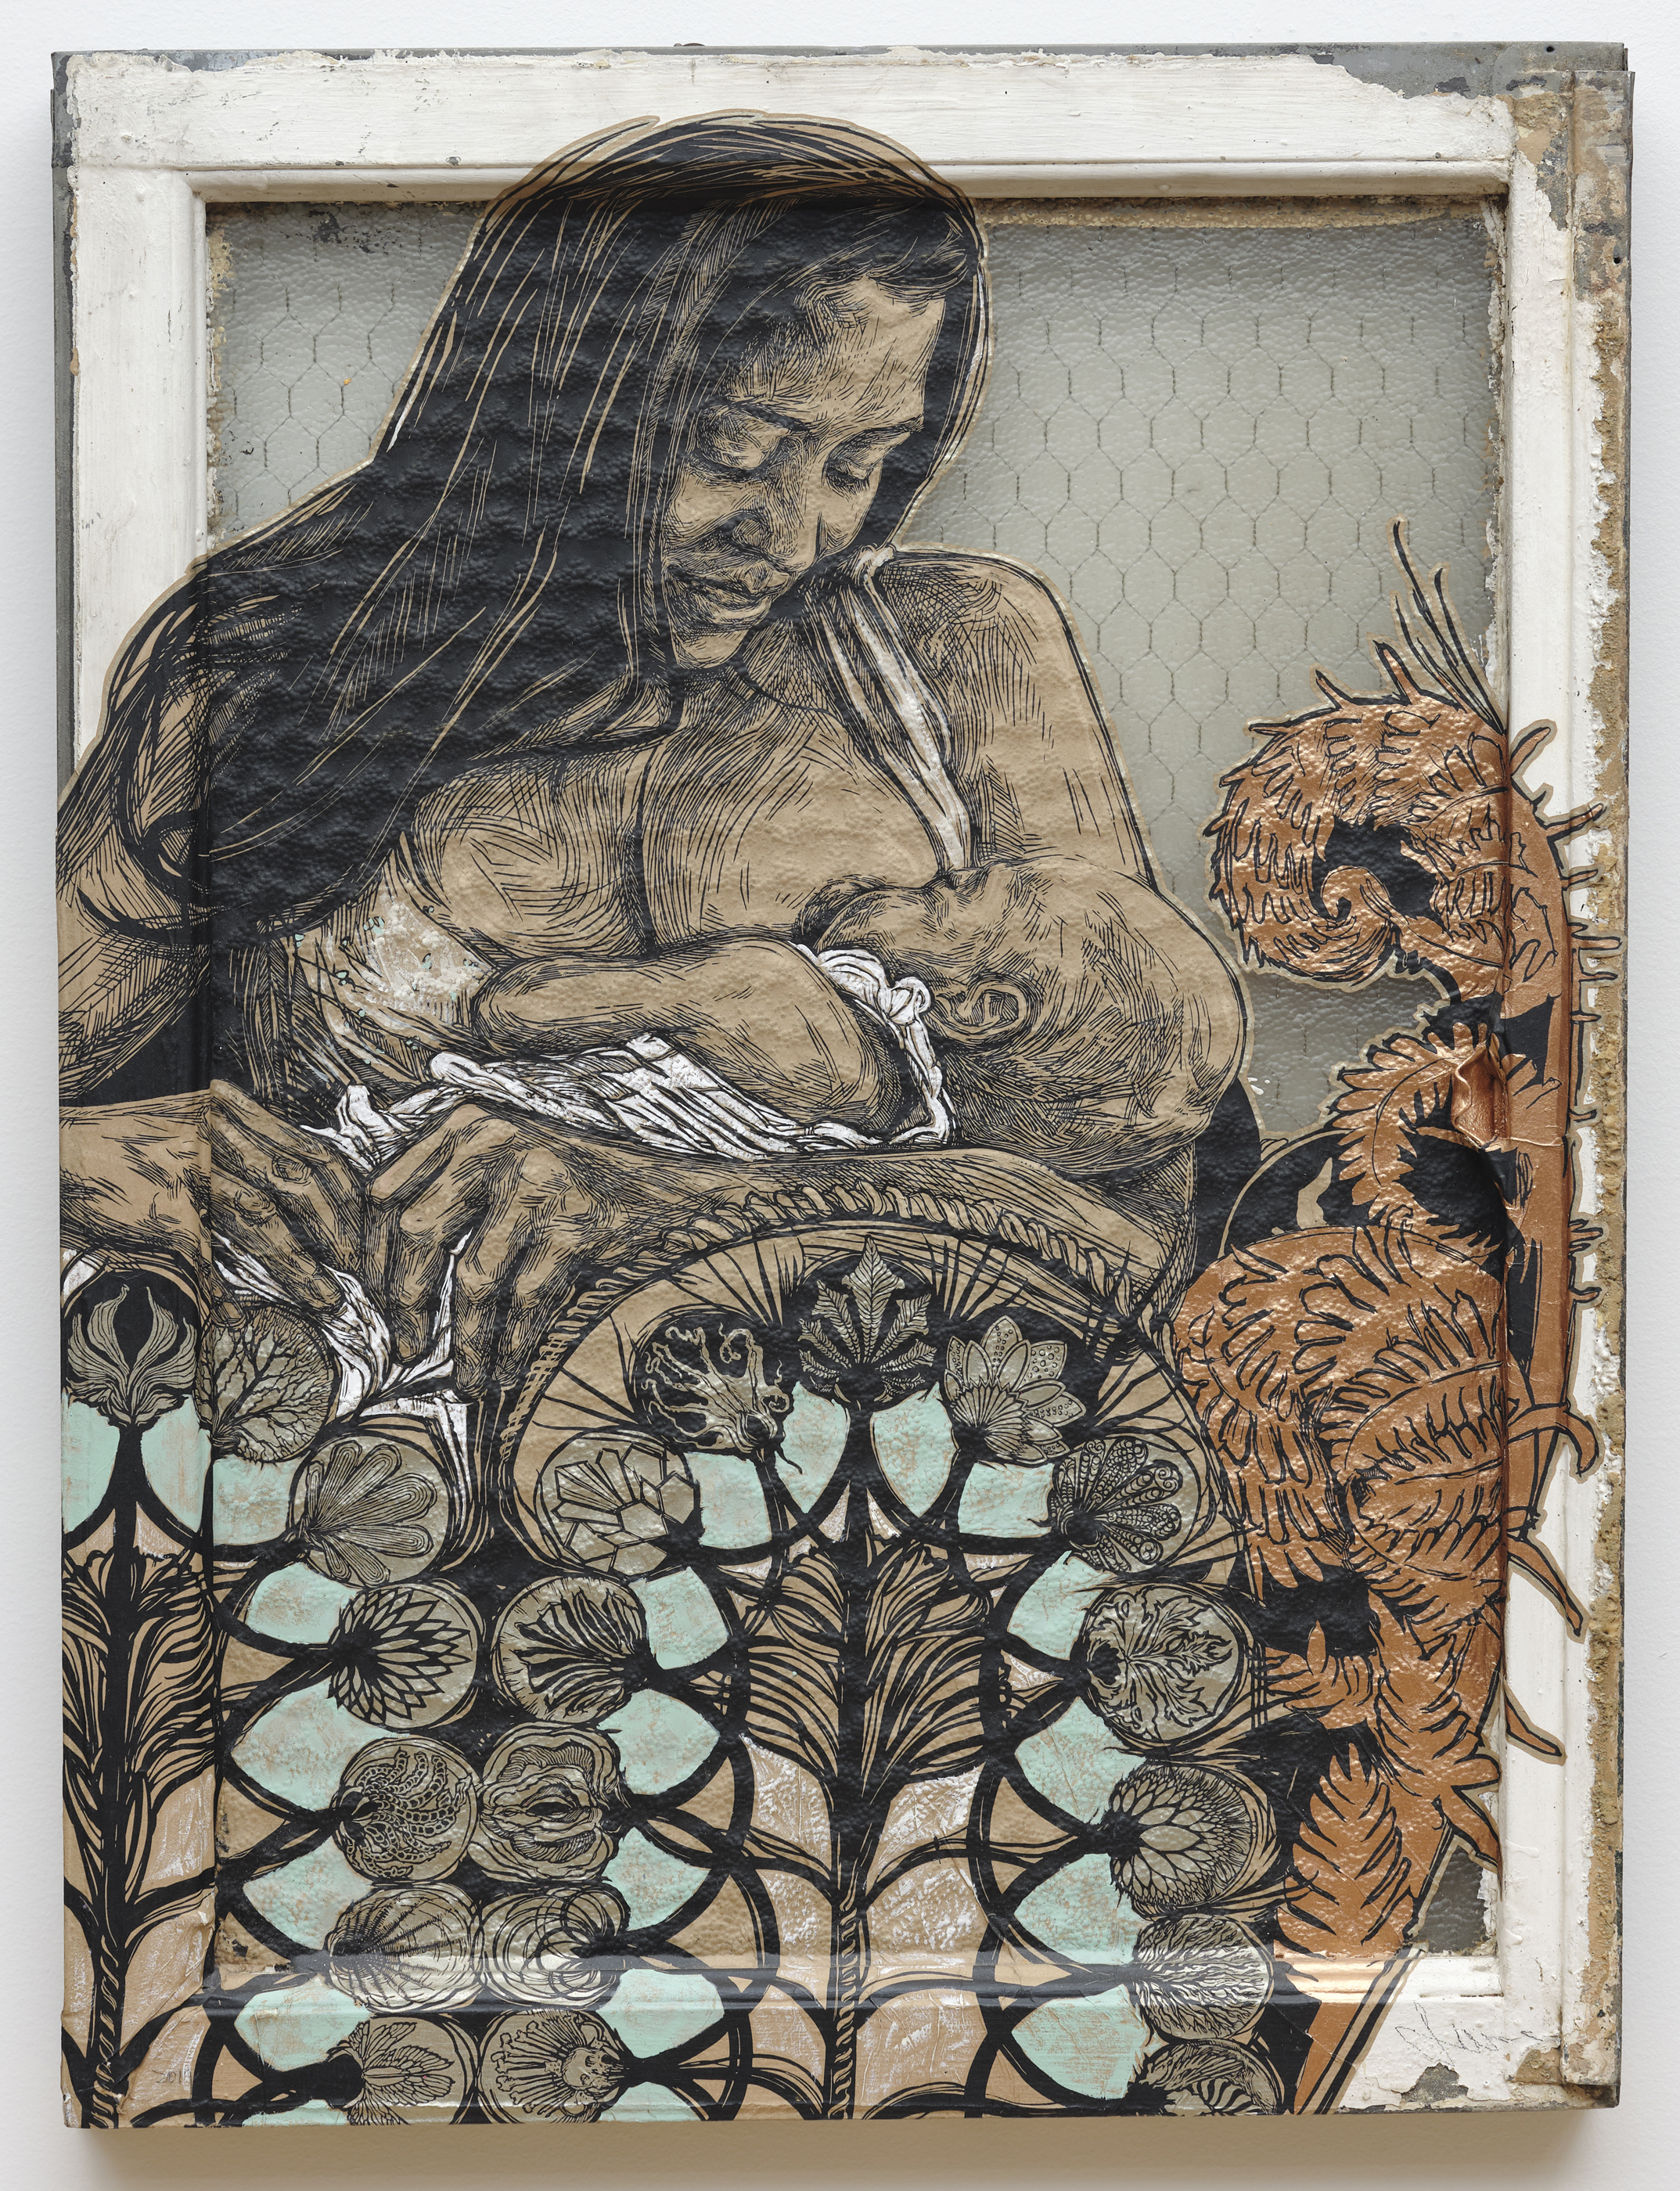 A large block print of a dark-skinned woman with long dark hair holding a baby up to her breast and bursing. The bottom of the image is organic, abstract patterns. The whole piece is done atop a window frame with wires on it.